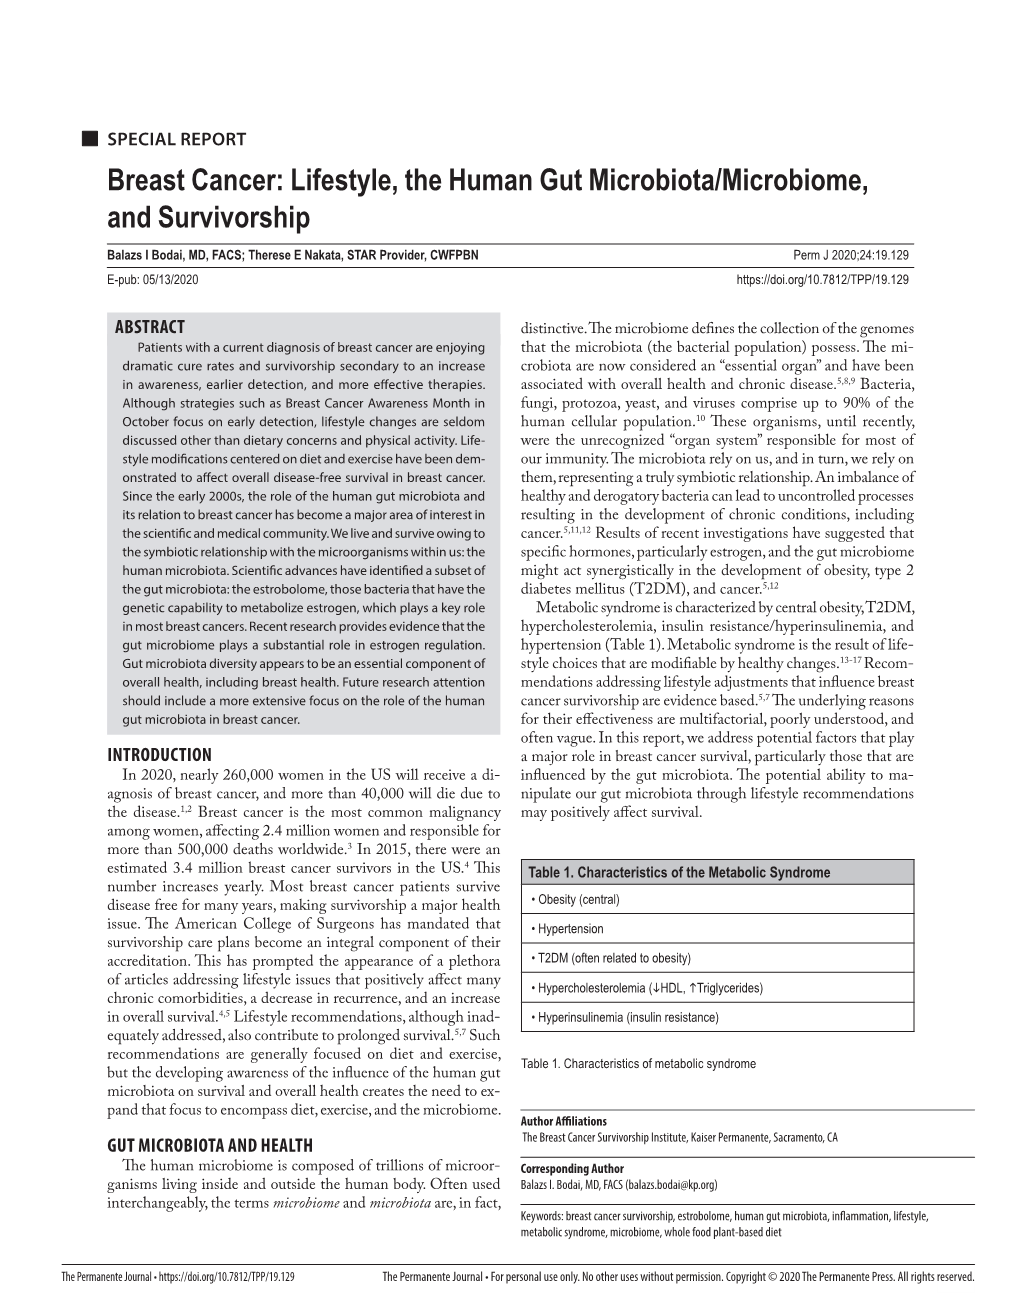 Breast Cancer: Lifestyle, the Human Gut Microbiota/Microbiome, and Survivorship